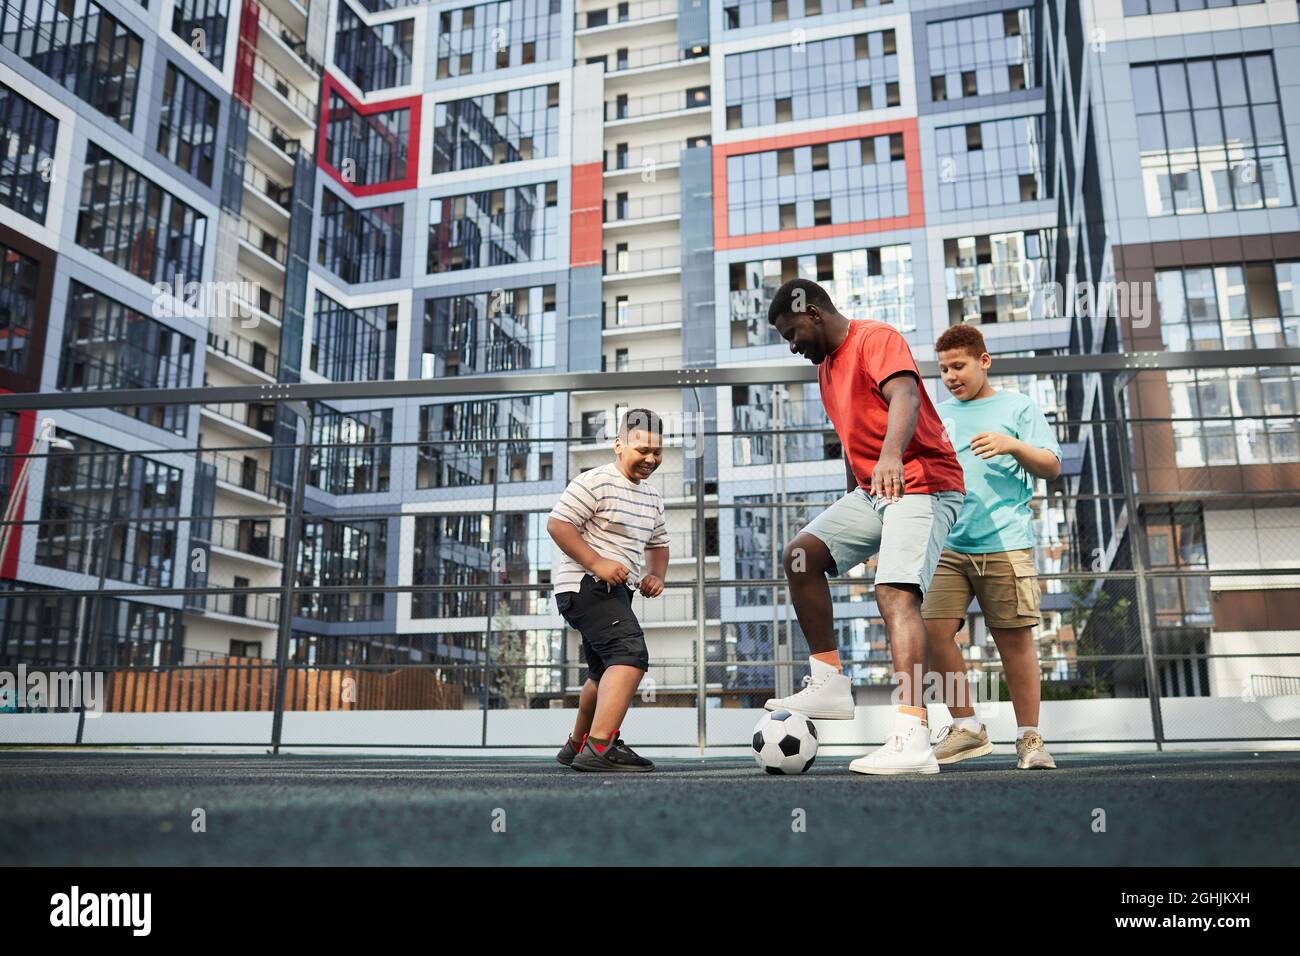 Cheerful young black man playing soccer with boys against modern flat block building Stock Photo